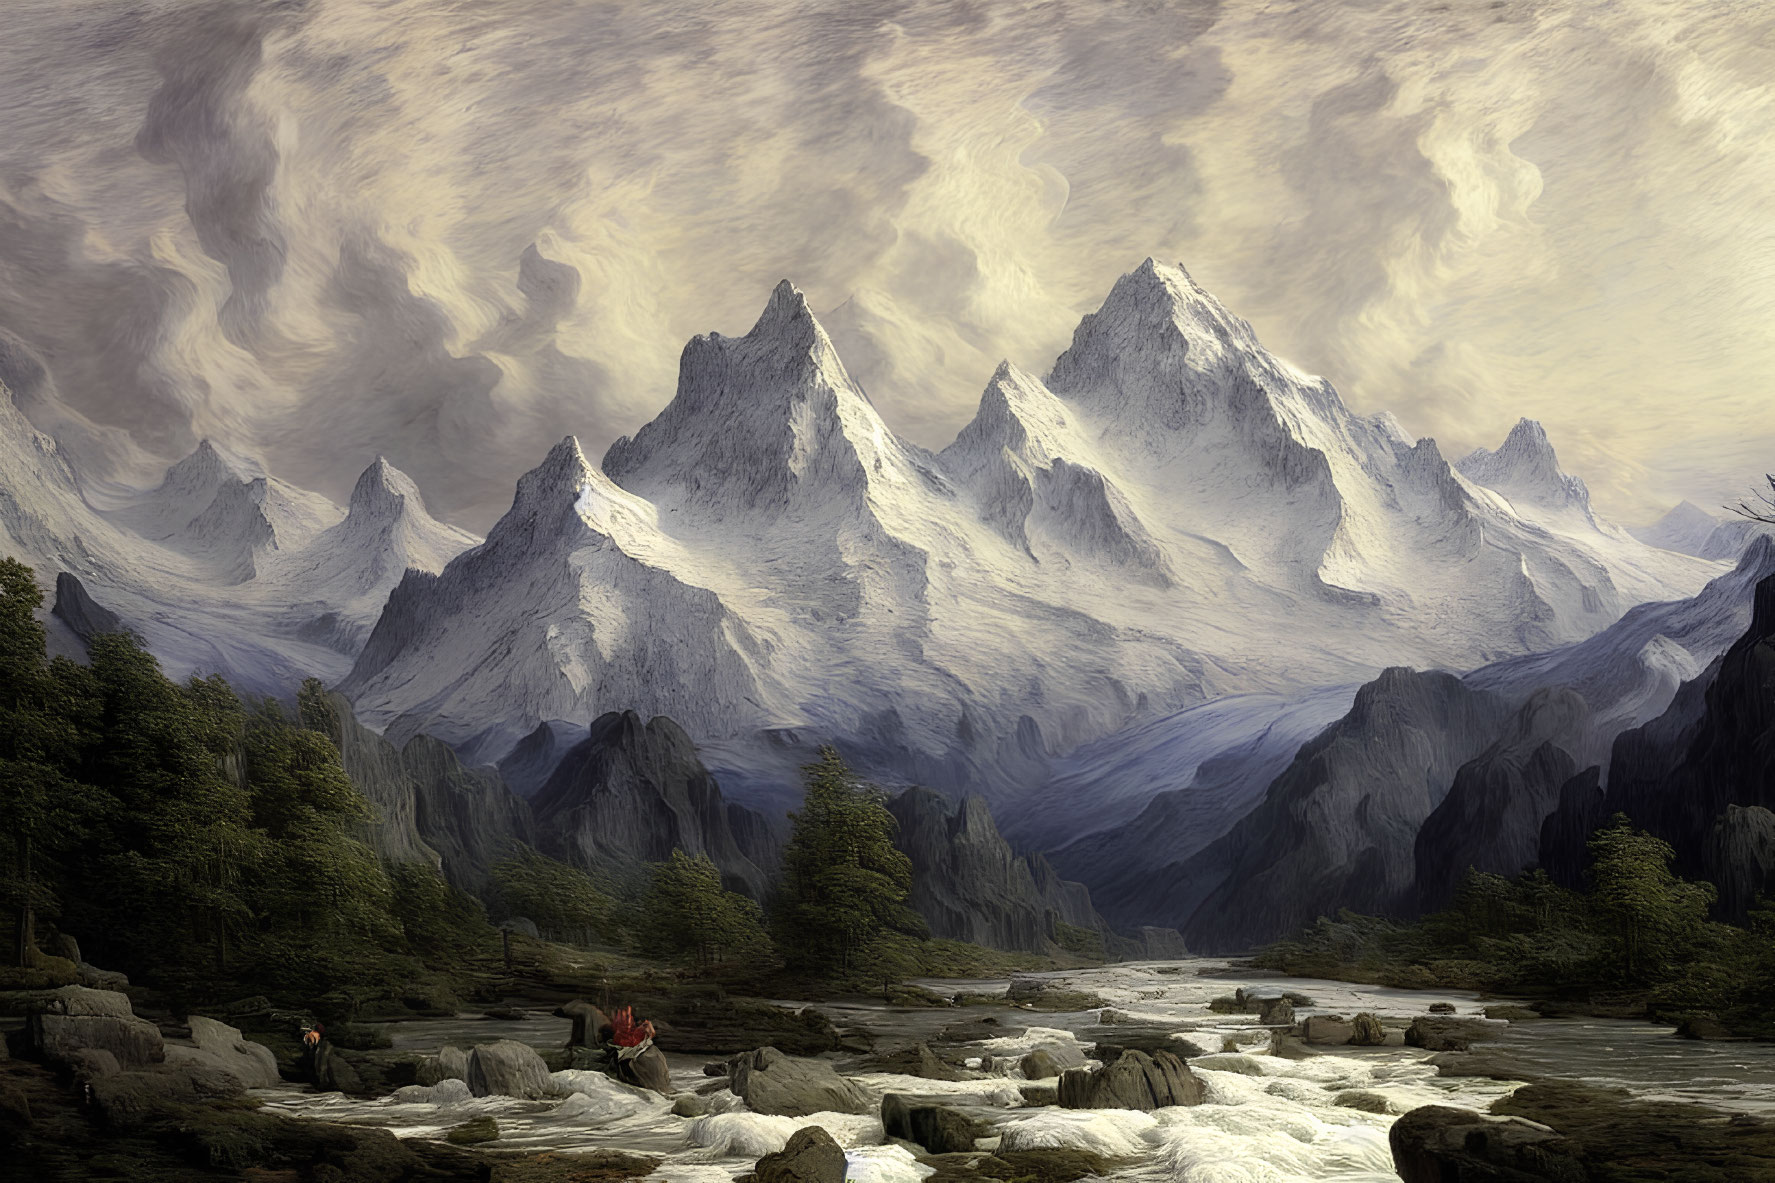 Snow-capped mountains painting with river and figures